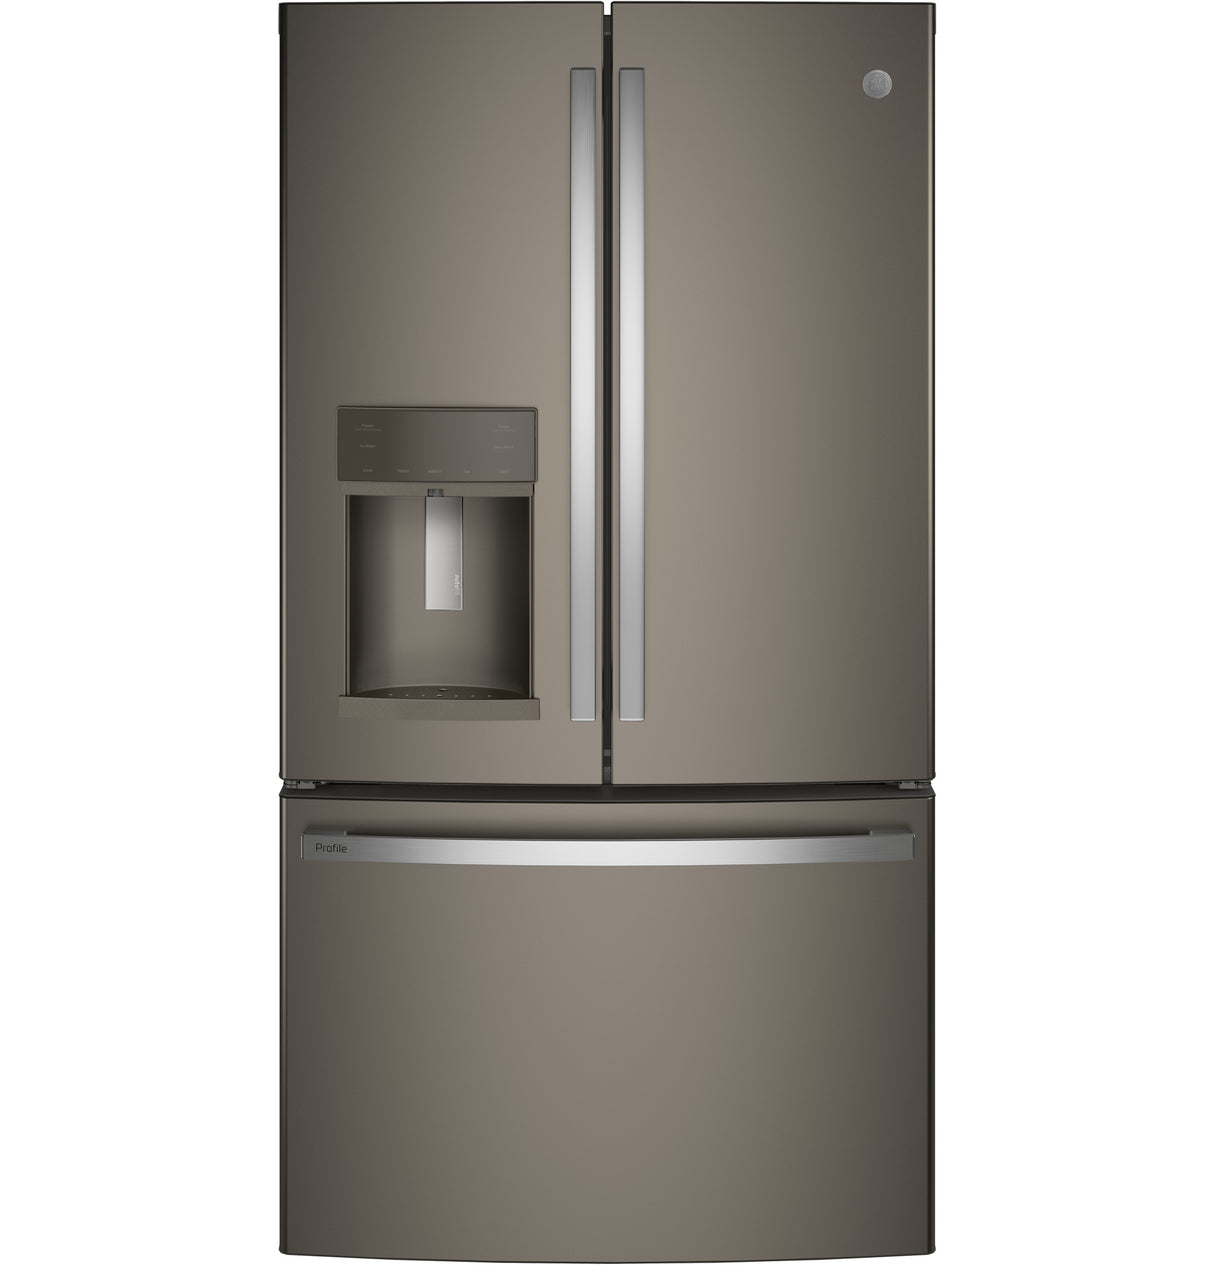 GE Profile(TM) Series ENERGY STAR(R) 22.1 Cu. Ft. Counter-Depth French-Door Refrigerator with Hands-Free AutoFill - (PYE22KMKES)